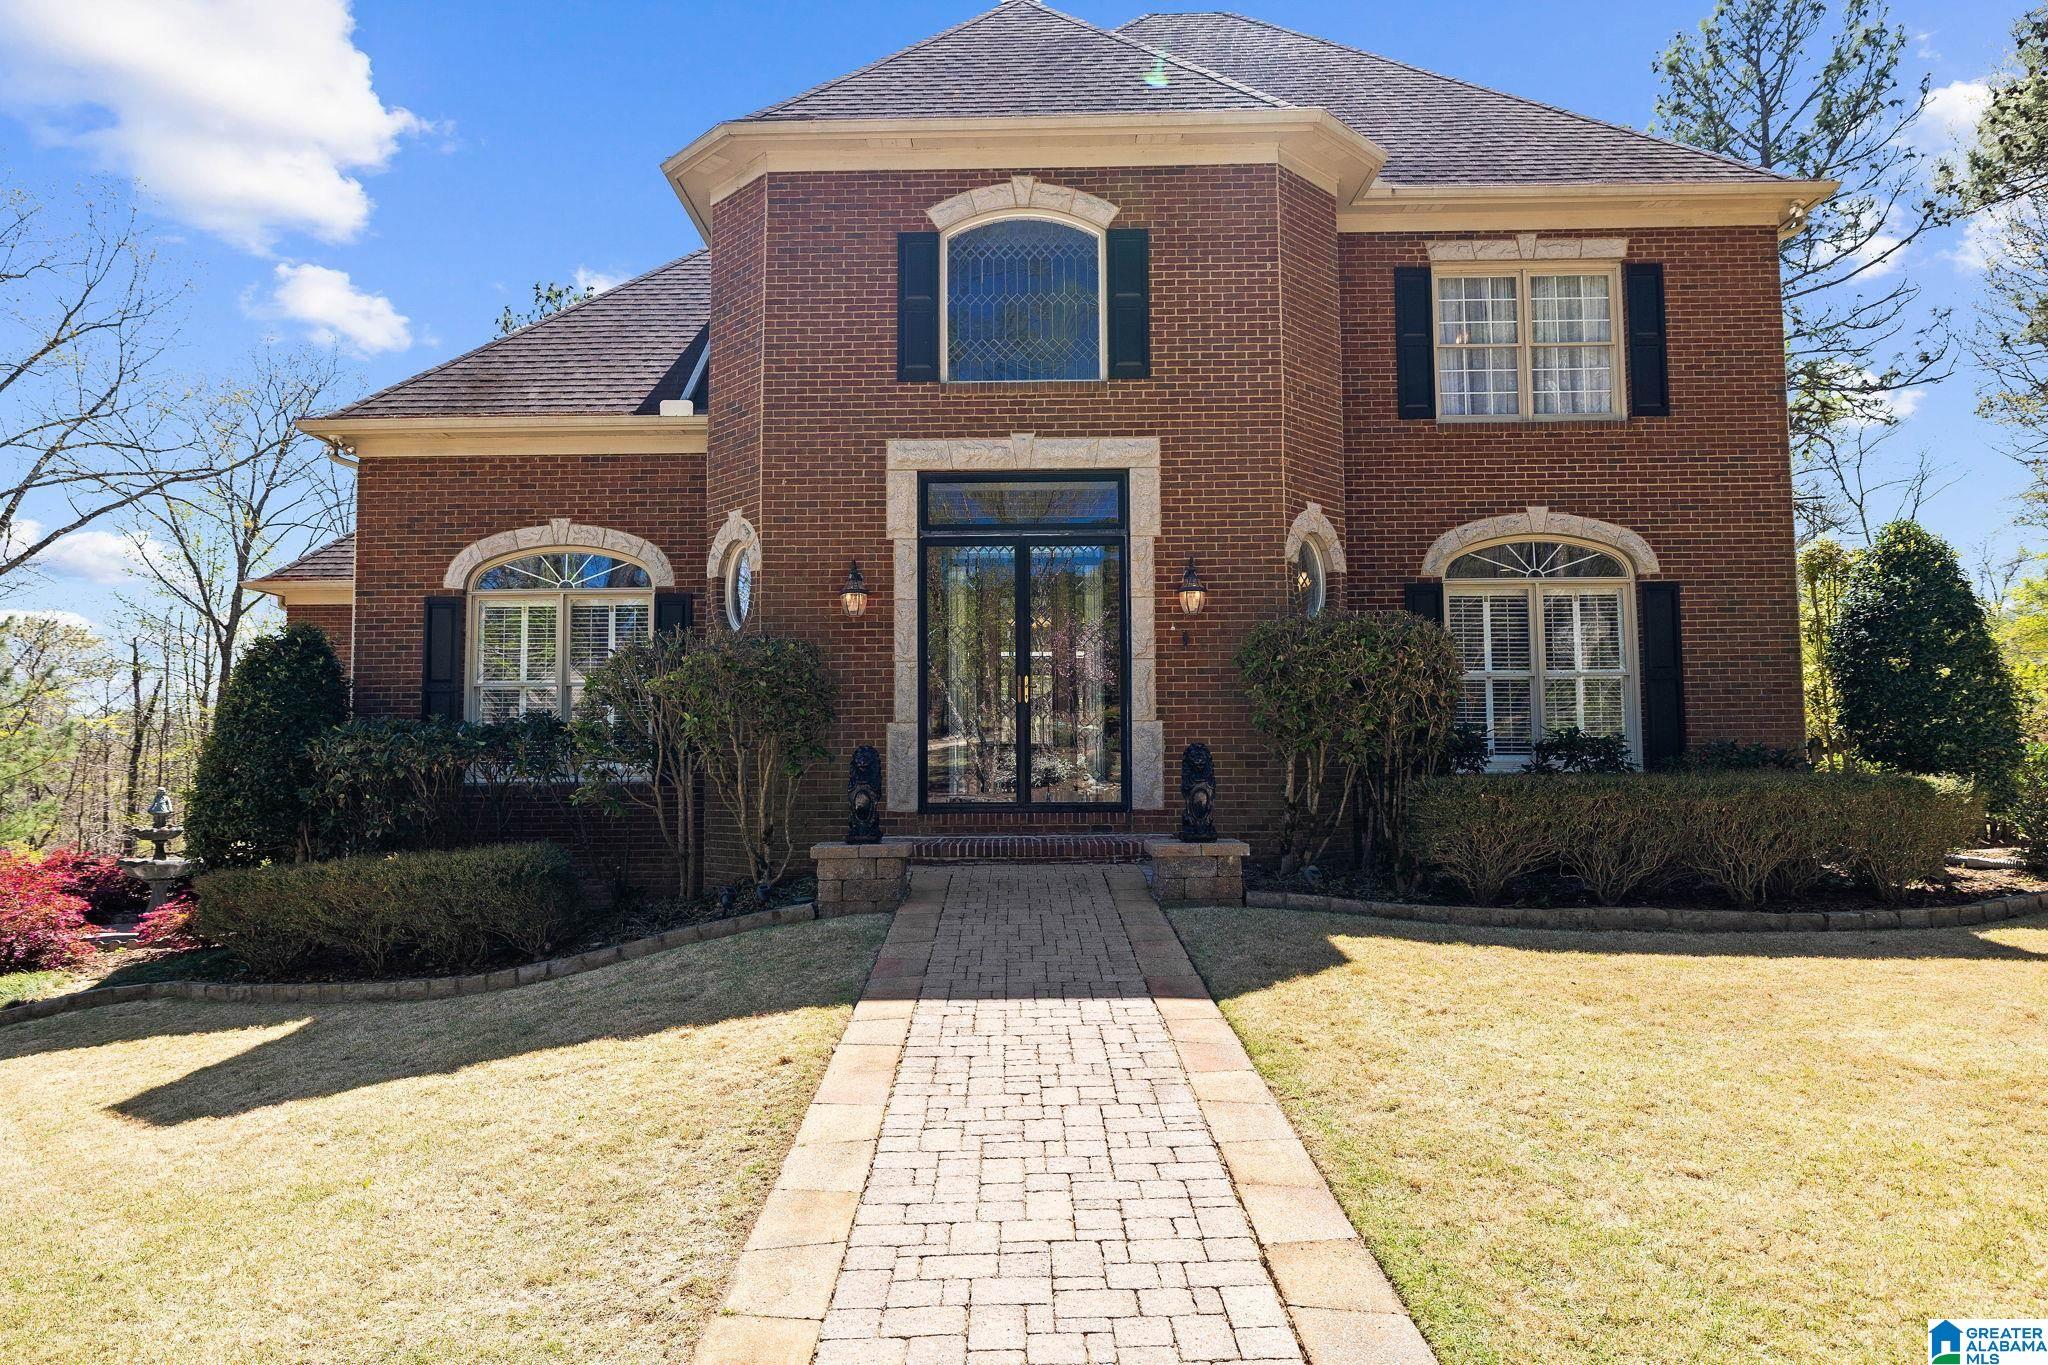 RARE OFFFERING: This one-owner custom-built home is nestled on almost an acre lot in a cul-de-sac in gated Highland Lakes. Situated on a park-like setting w/running brook on both sides of the driveway leading to the house all add to the curb appeal of this much-loved home.Step into the house and you see its charm throughout w/barreled 20 ft plus ceiling, exquisite crown moulding & custom details. Make family memories in this memorable dining room. Great room w/fireplace & built-ins, curl up w/a great book in the cozy keeping room w/fireplace & custom ceilings, built-ins & 2 sets of french doors. Huge kitchen w/ample-sized breakfast room, airy sunroom w/exposed brick arches. Spacious master bedroom, sumptuous master bath & adjoining laundry room. Upstairs offers 2 generous-sized bedrooms & en suite baths. Finished basement is perfect for in-law suite, office/study, bonus room (could be used as a bedroom) & space for expansion. Sizable screened back porch overlooking total privacy.